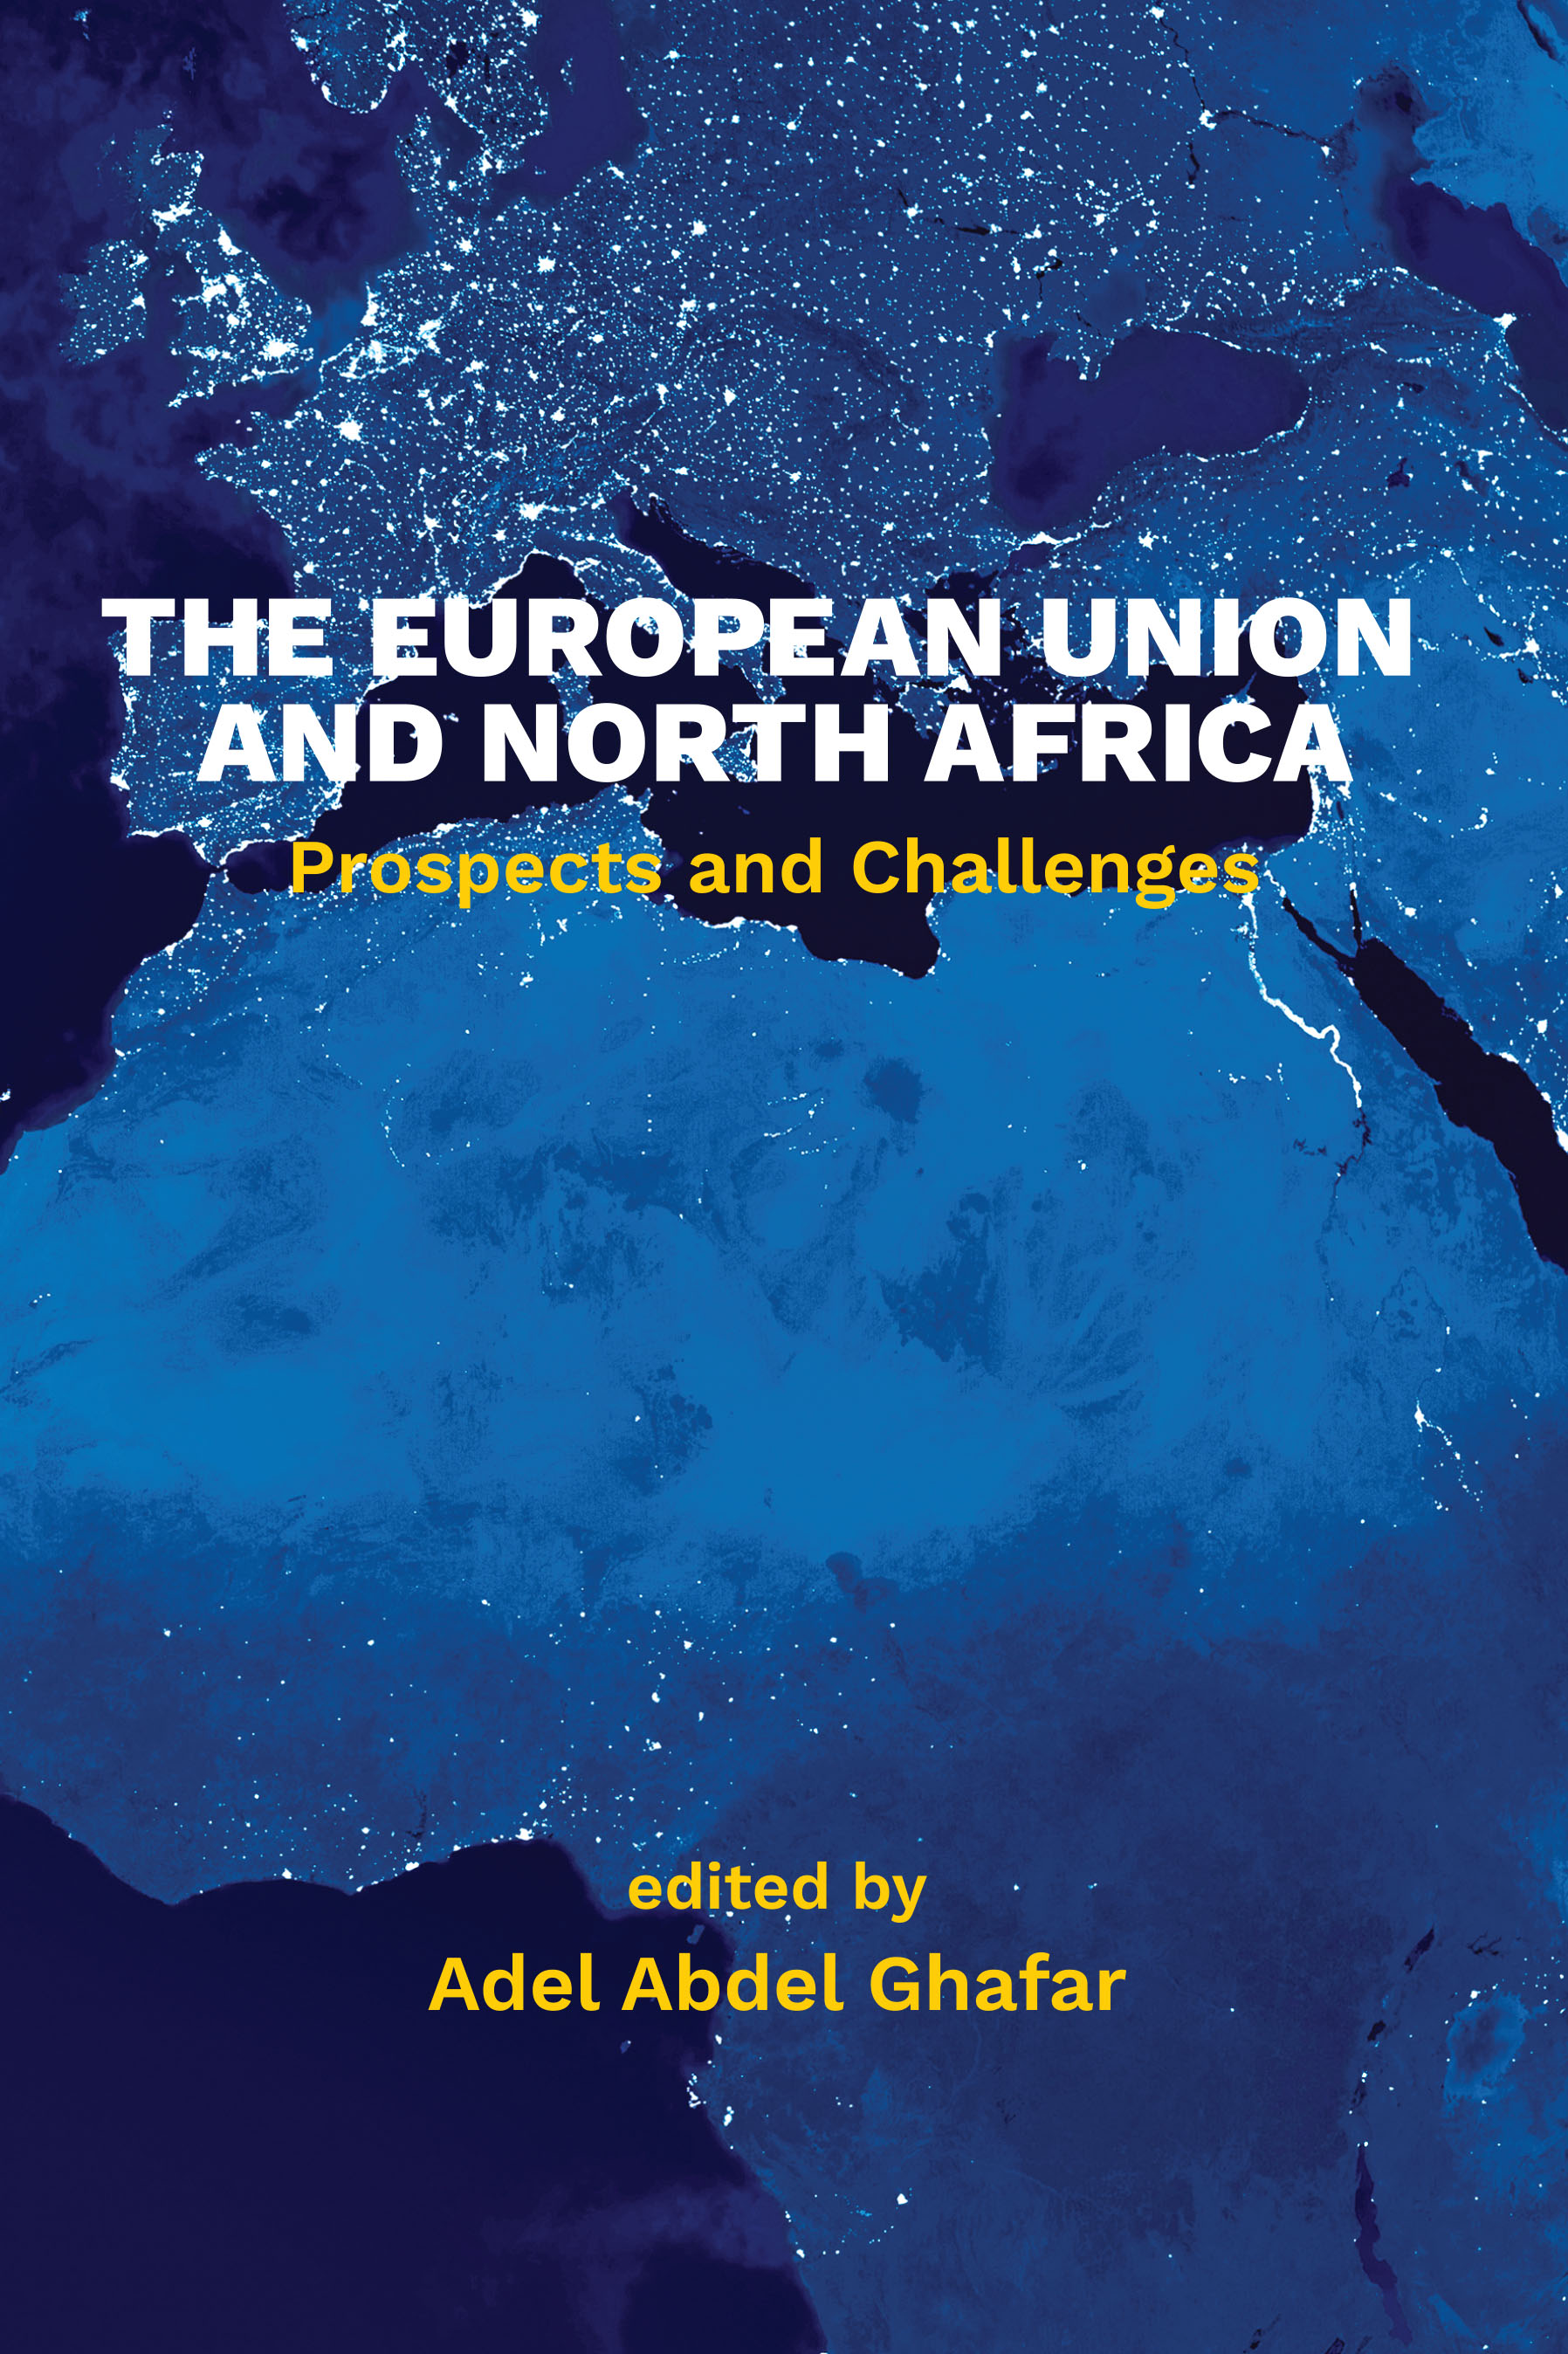 The European Union and North Africa: Prospects and Challenges